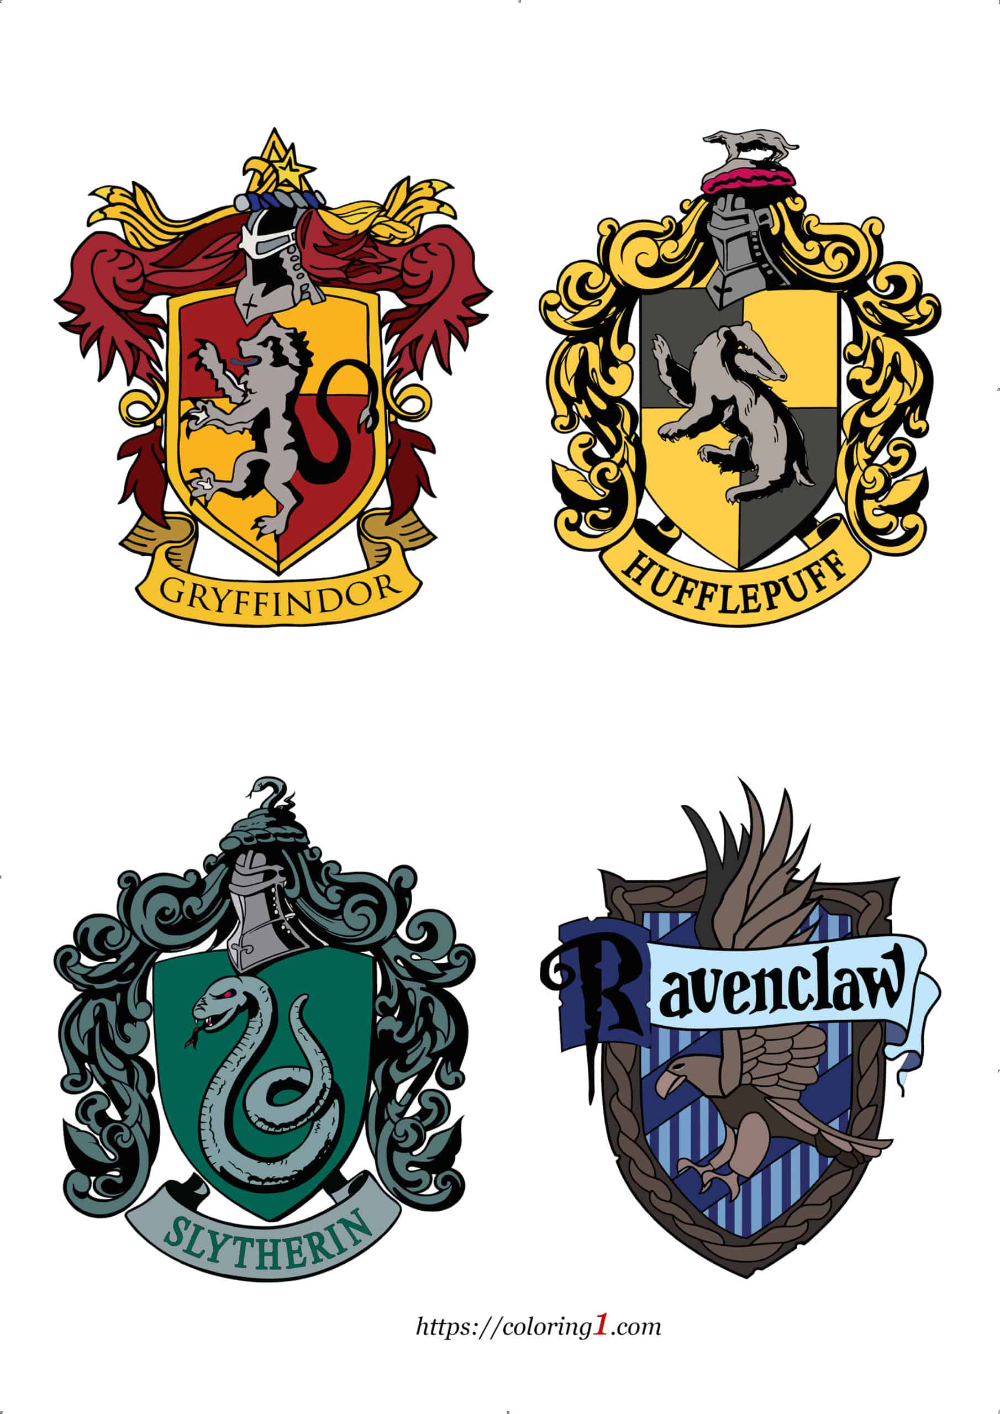 Harry Potter House Crests Coloring Pages 2 Free Coloring Sheets 2021 Harry Potter Coloring Pages Harry Potter Stickers Harry Potter Colors